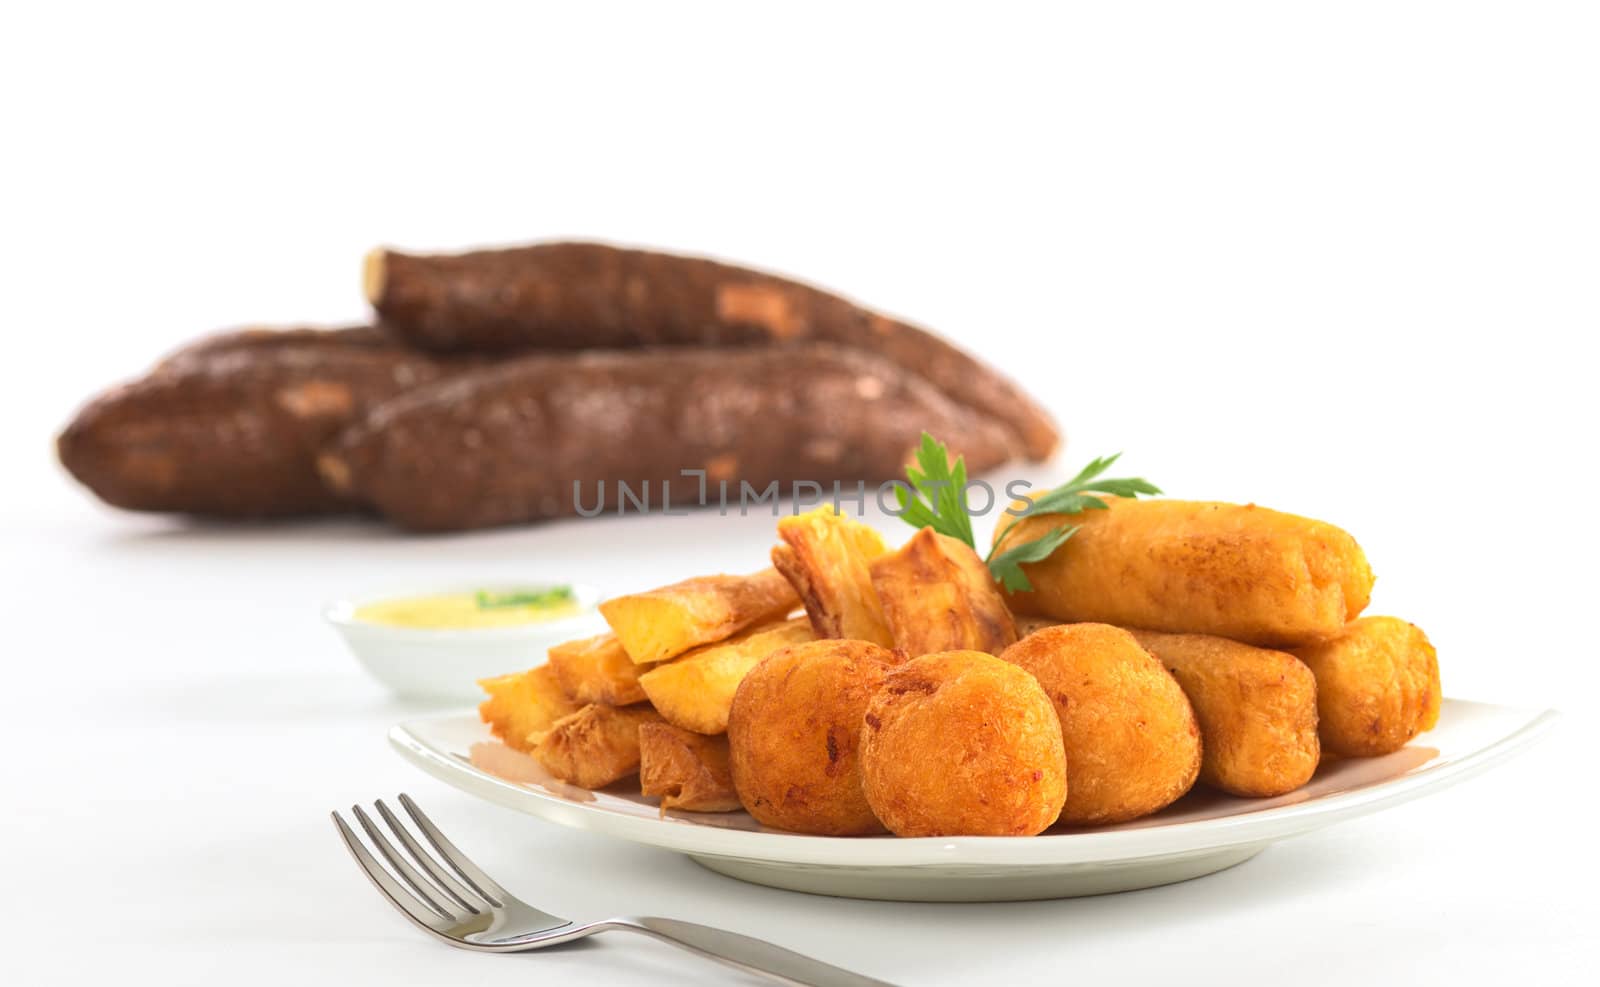 Filled fried balls and sticks out of manioc with a dip and some manioc roots in the back (Selective Focus, Focus on the manioc balls)